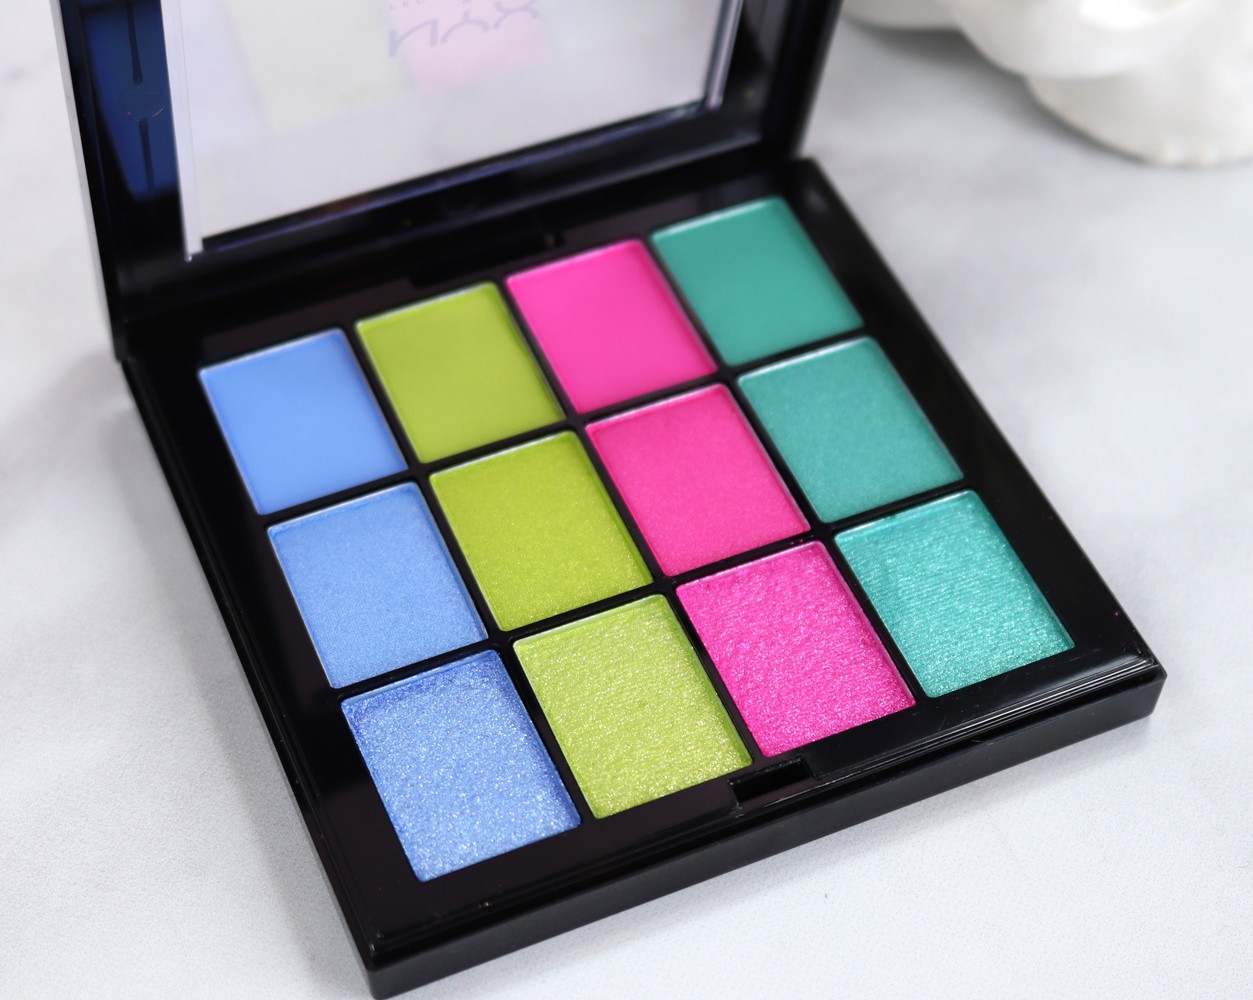 NYX Ultimate Electric Palette - Coachella Music Festival Makeup Ideas by Cruelty Free Beauty Blogger My Beauty Bunny